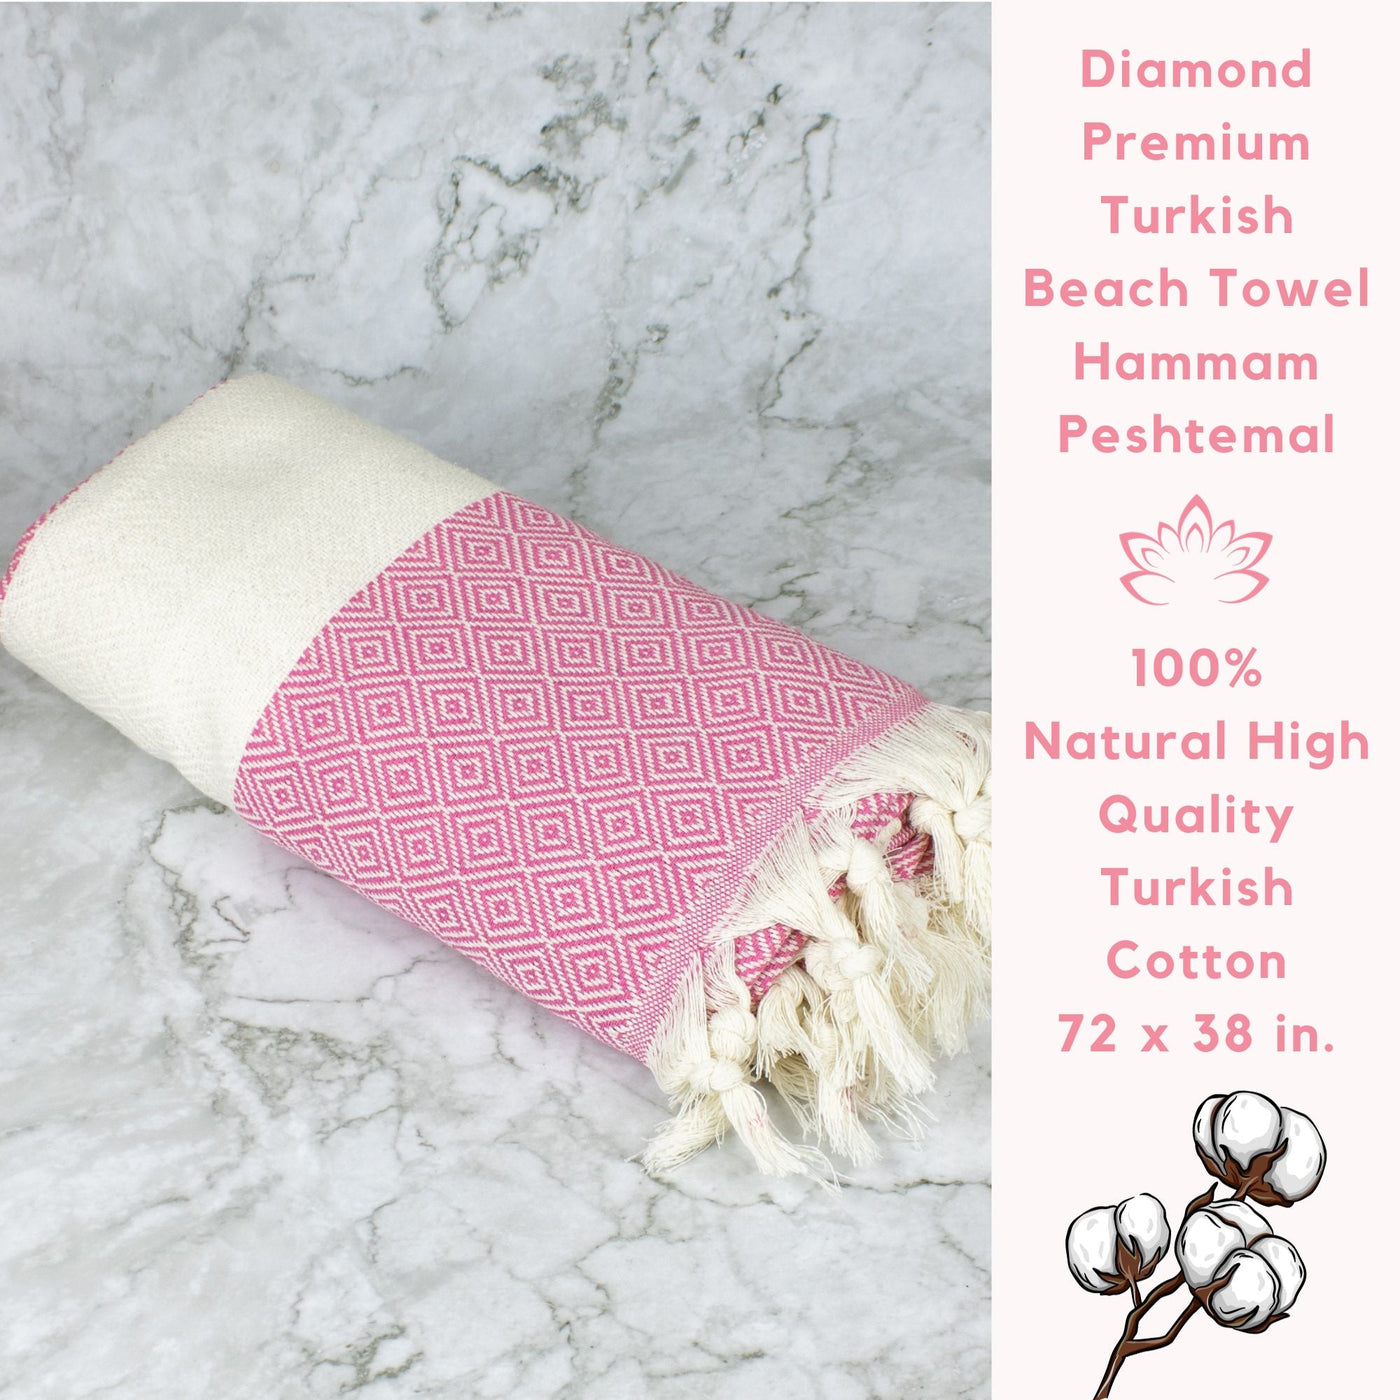 Holiday Gift Basket - Handmade Rose Petals Spa Gift Set with Turkish Towel 13 pieces - Sand & Sea by Ashley